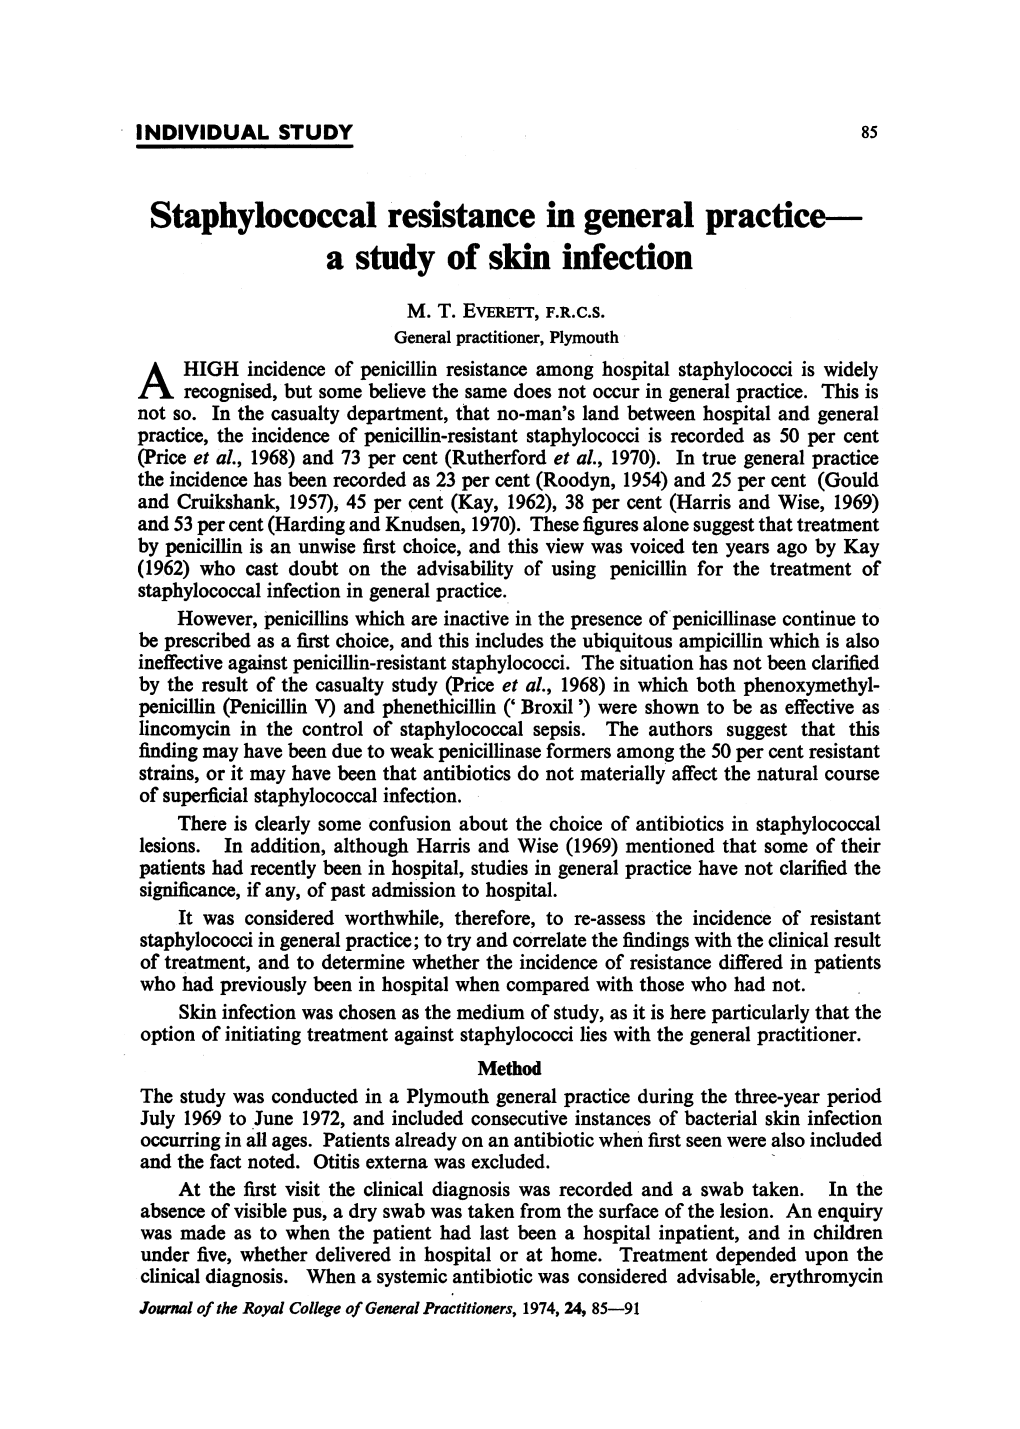 Staphylococcal Resistance in General Practice. a Study of Skin Infection M